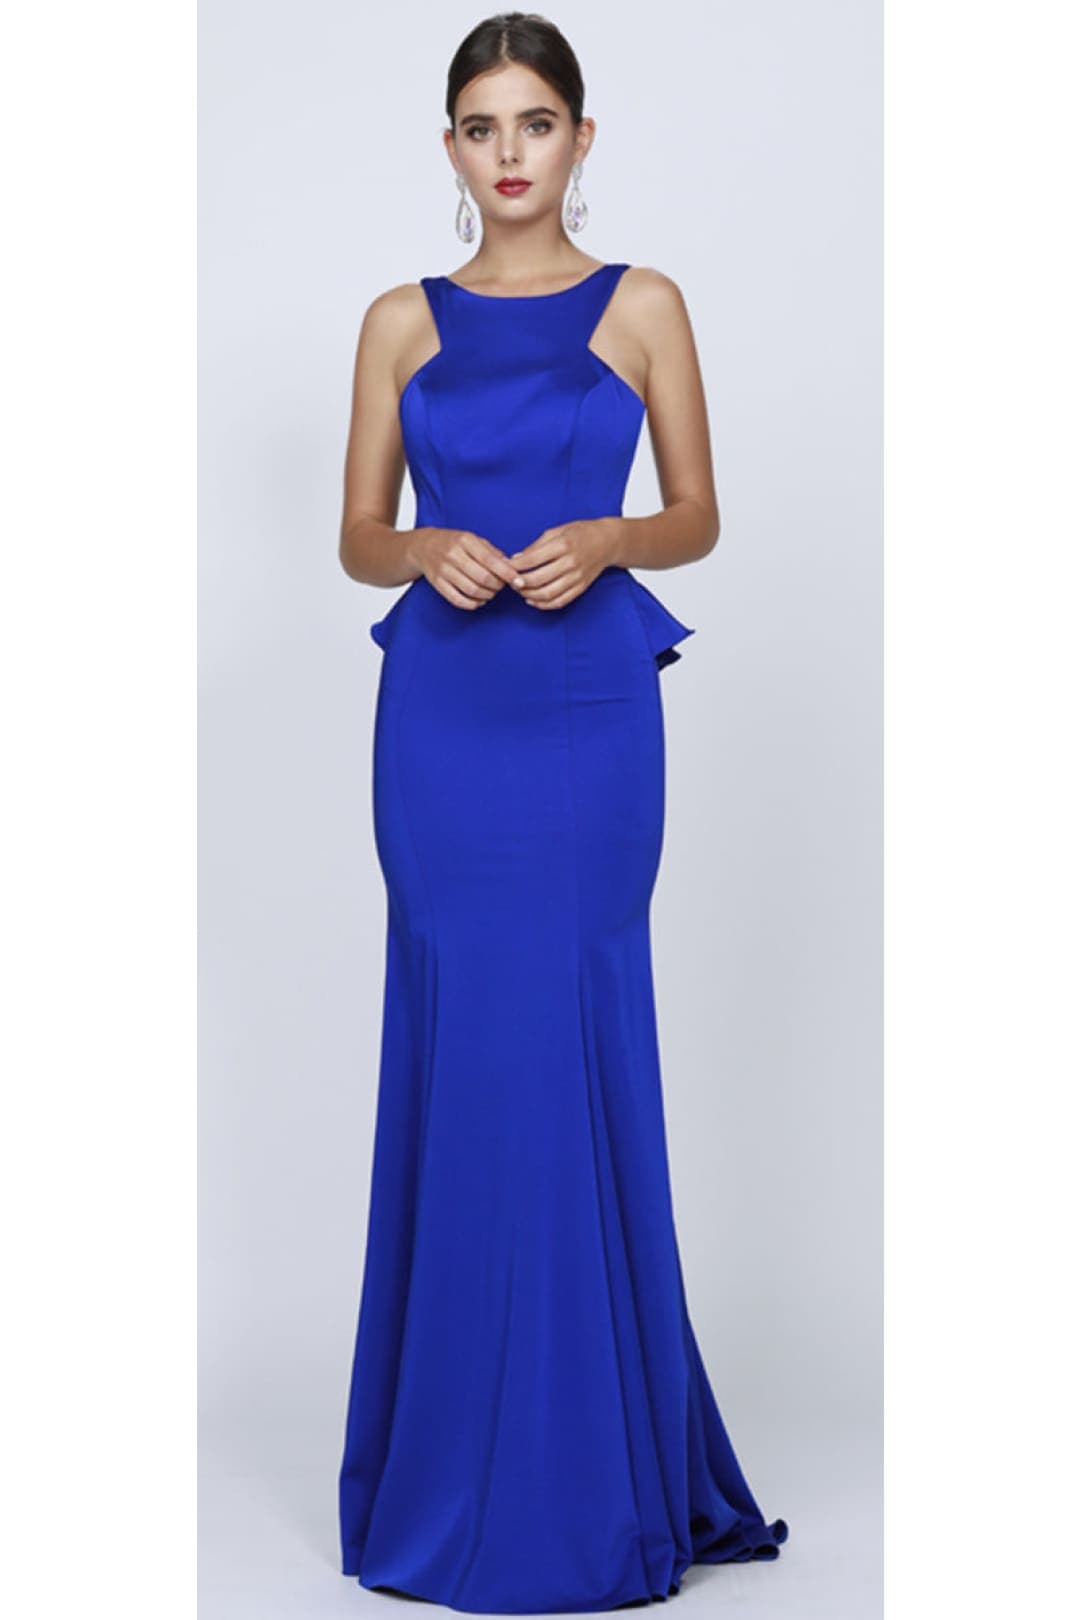 Simple Evening Gown on Sale - Royal Blue / L